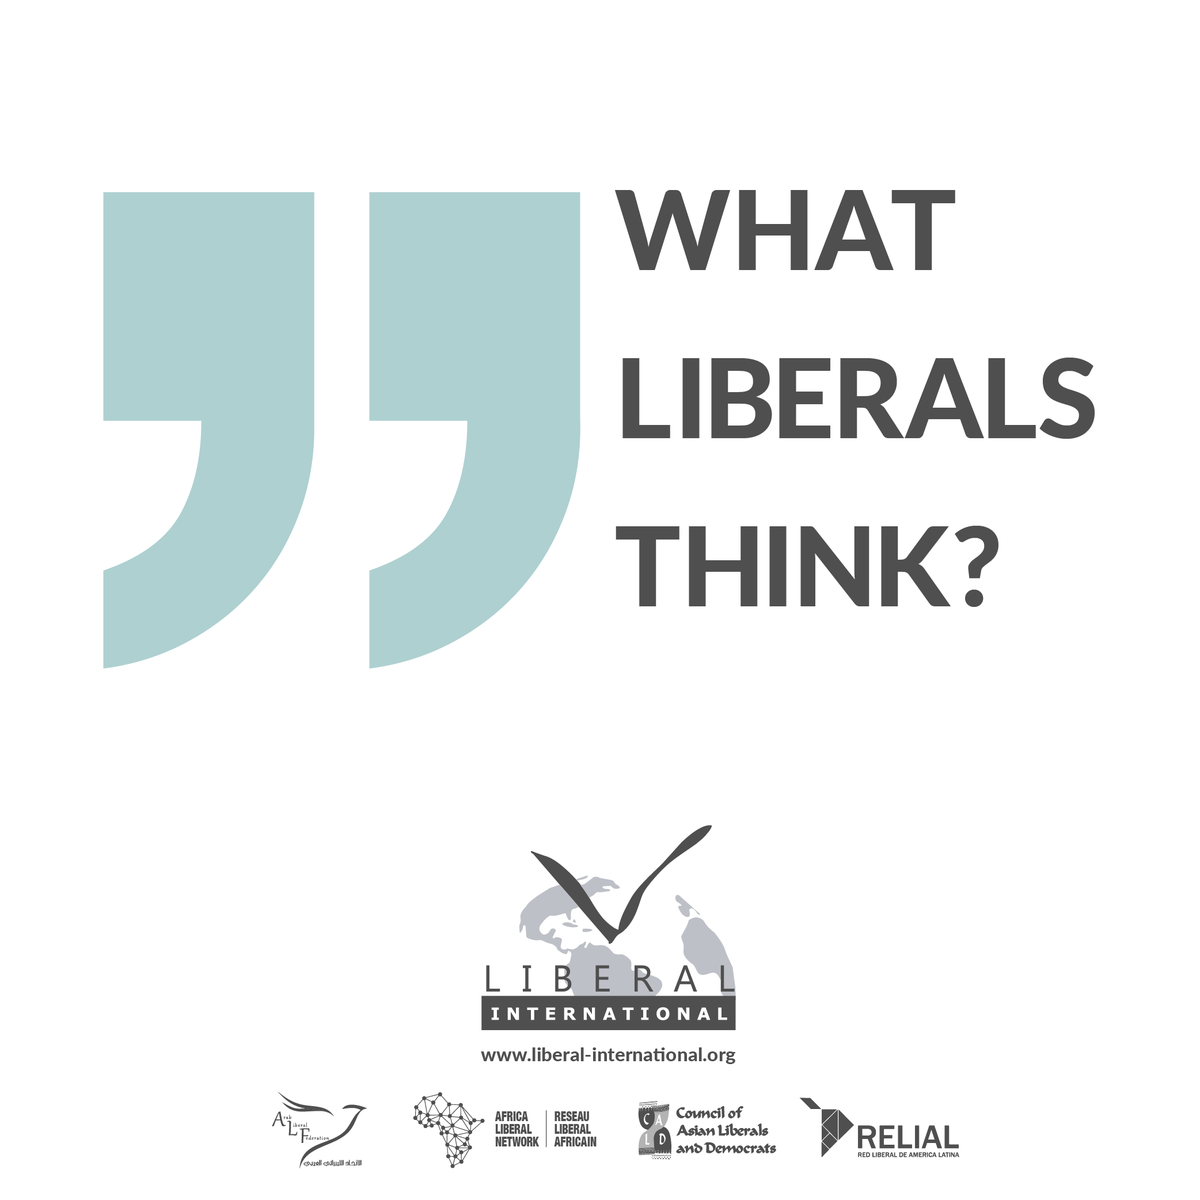 📣#Liberals agree that #democracy & #FreedomOfSpeech should not become victims of this pandemic!

LI #FreedomPrize Laureate & Leader of @VenteVenezuela @MariaCorinaYA calls on #democratic governments to reflect as the reality for Venezuelans has not paused

#WhatLiberalsThink